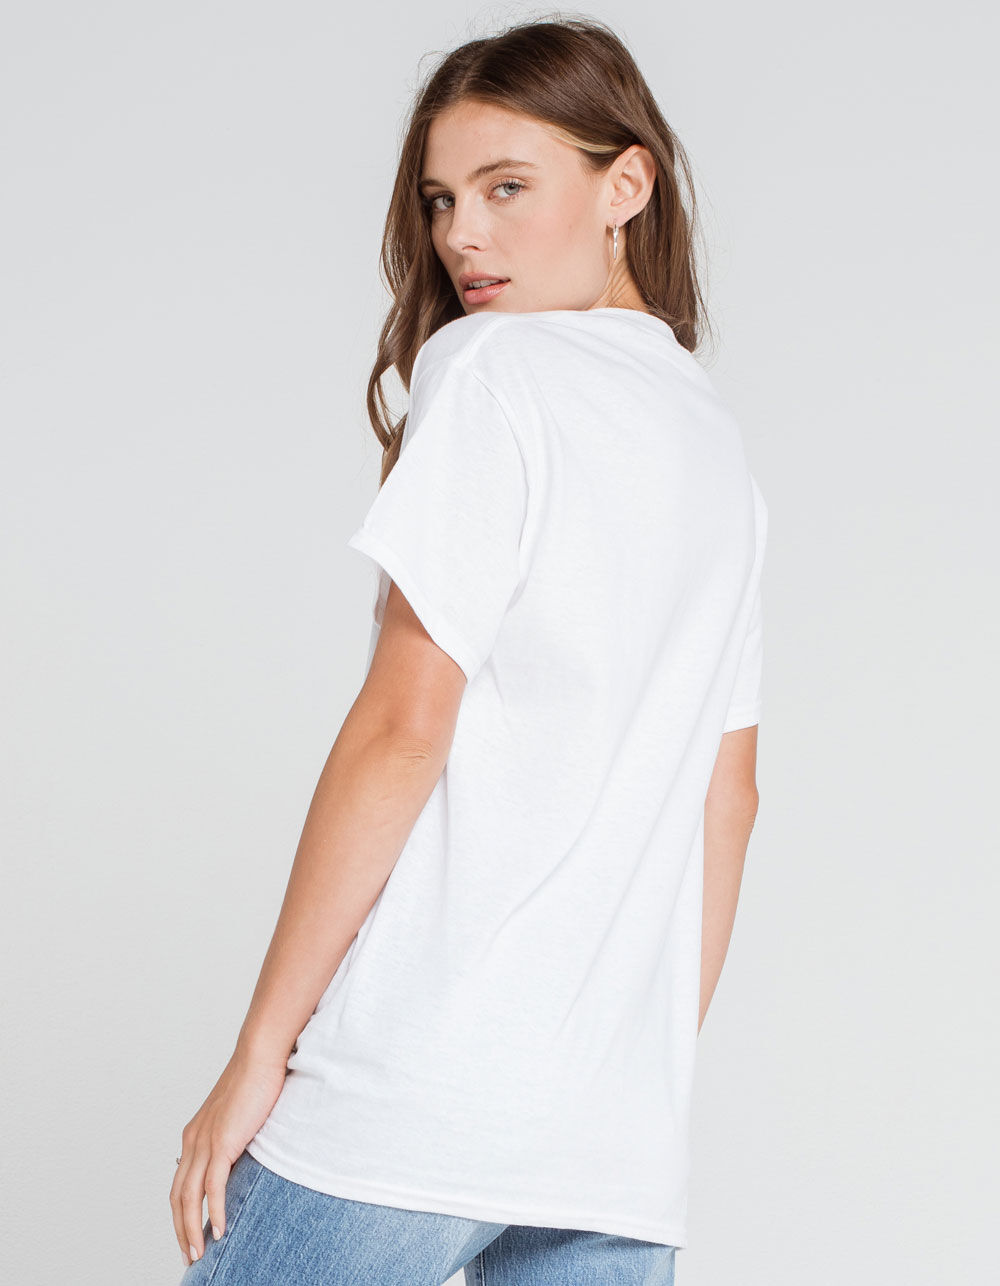 WEST OF MELROSE Vintage Poppies Womens Tee - WHITE | Tillys